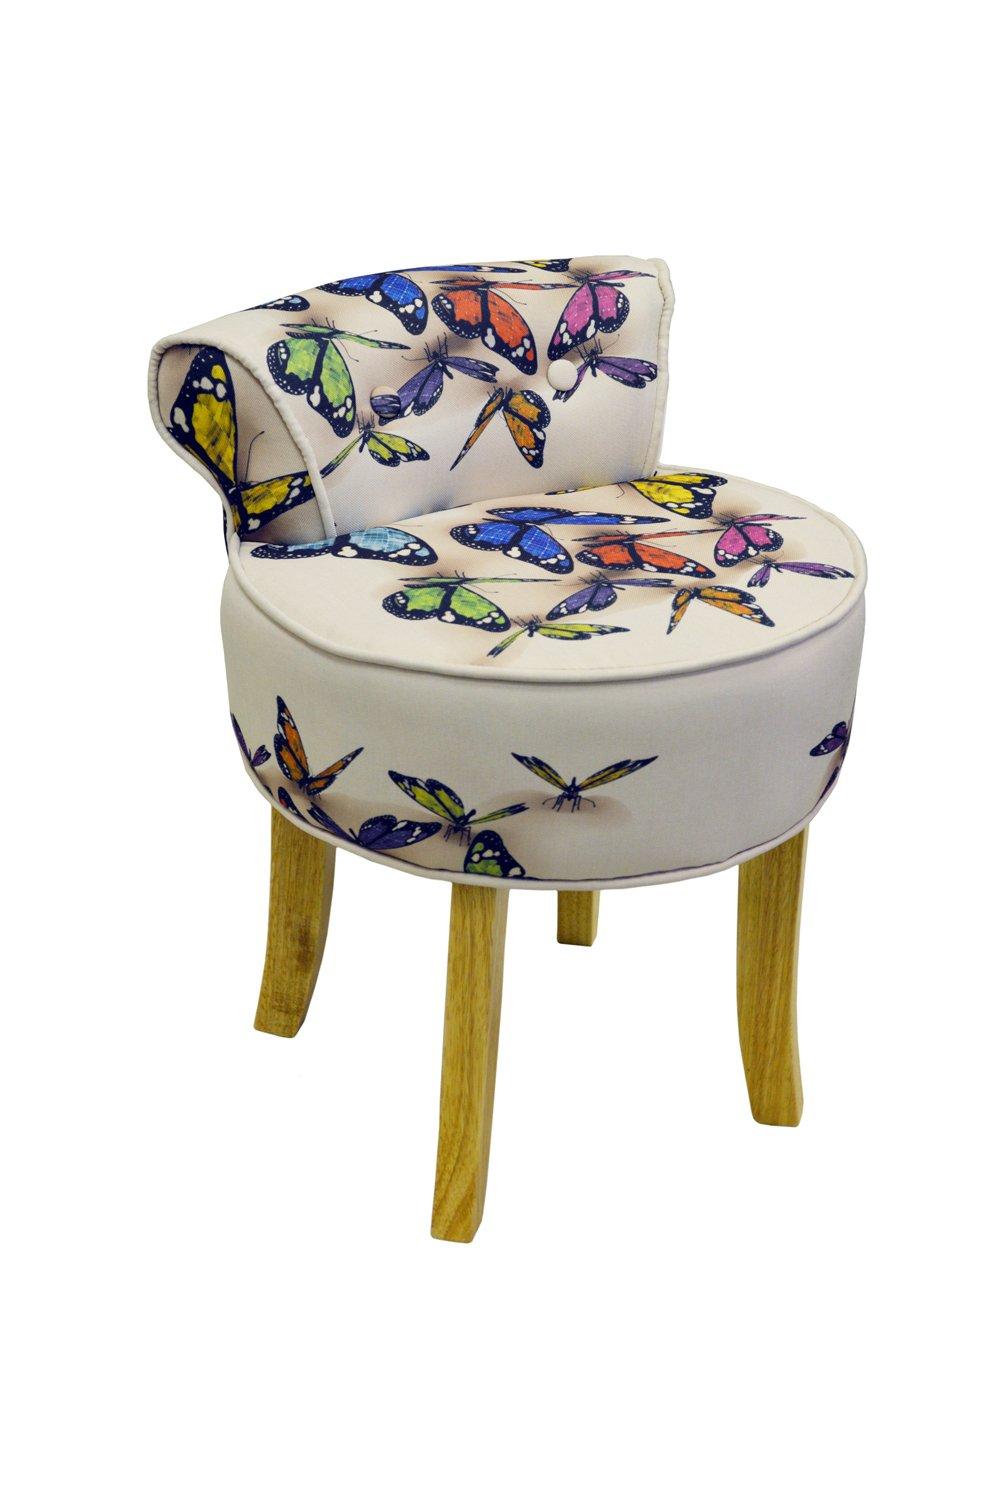 'Butterfly' - Stool  Low Back Padded Chair With Wood Legs - Cream  Multi